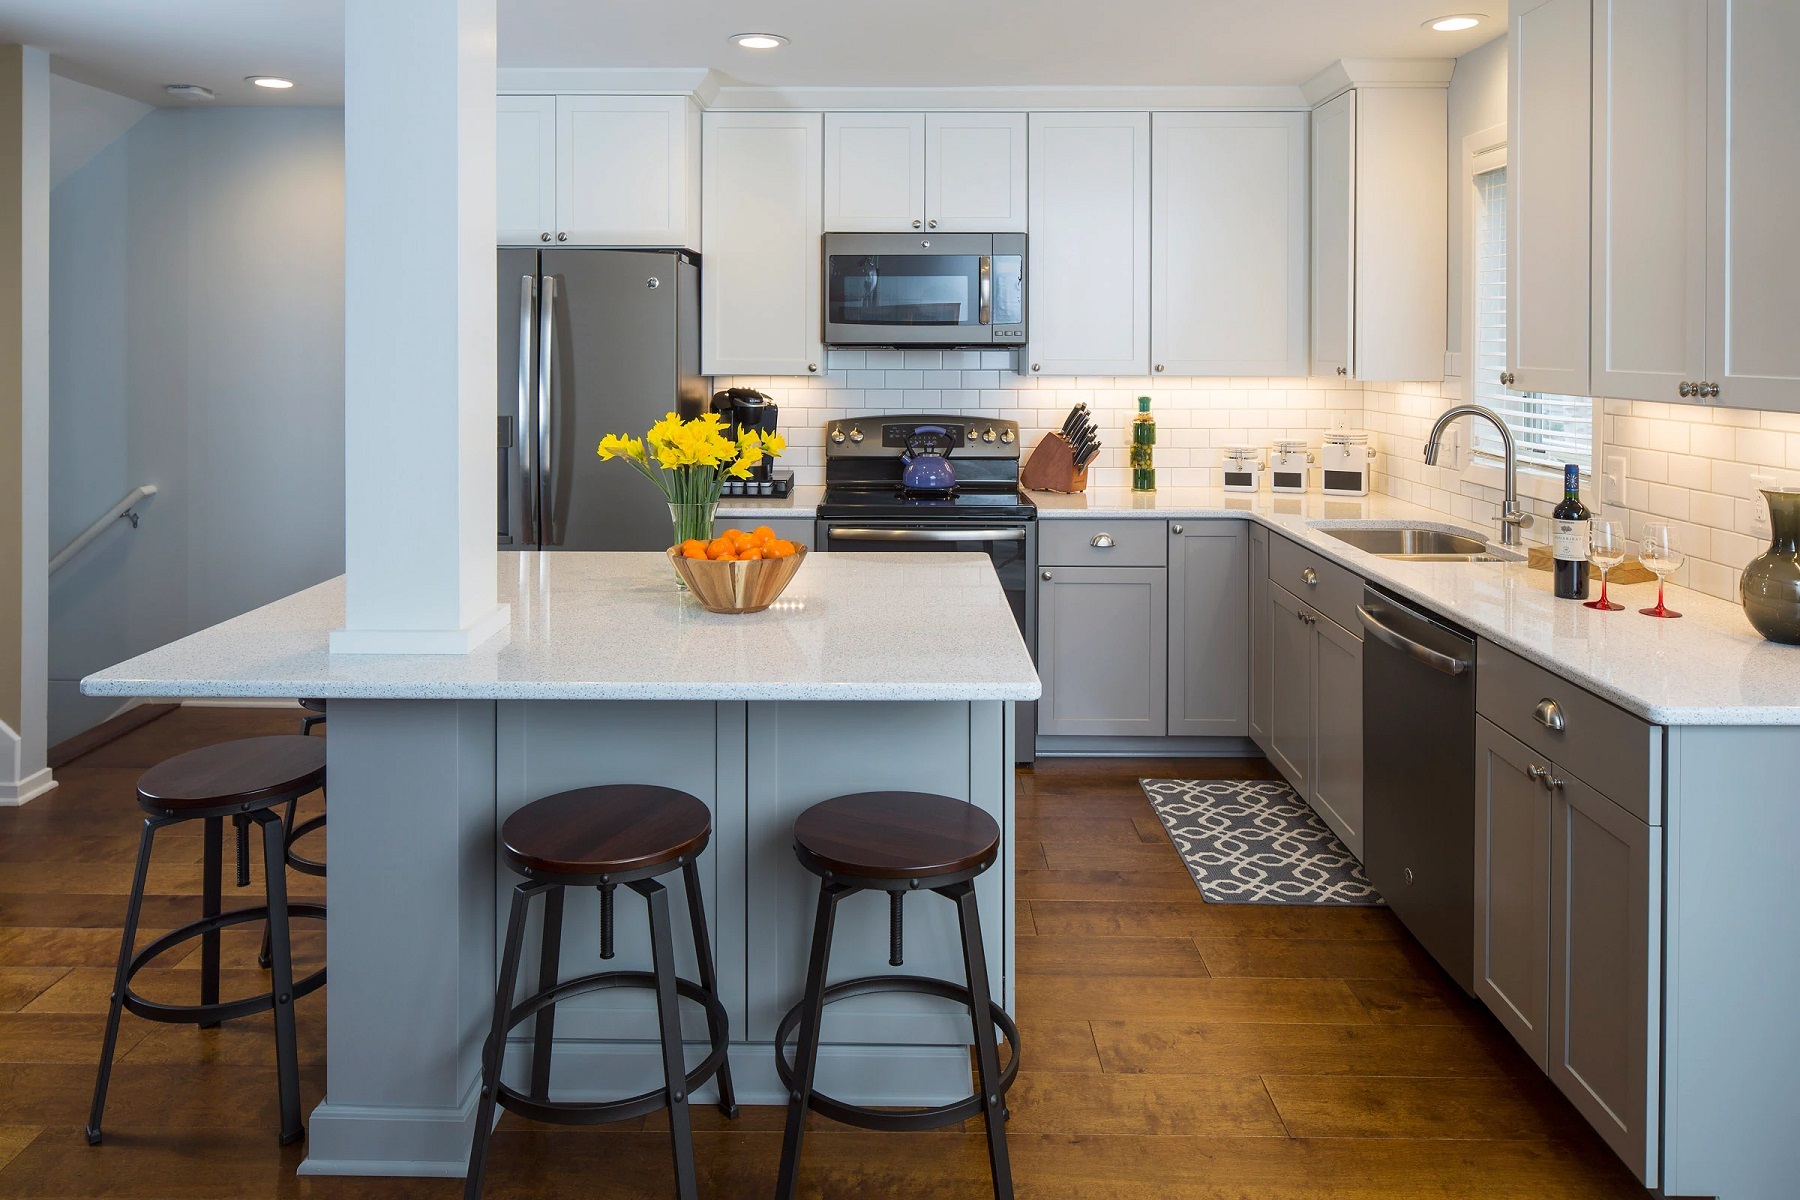 Space-Savvy Ideas to Maximize a Small Kitchen